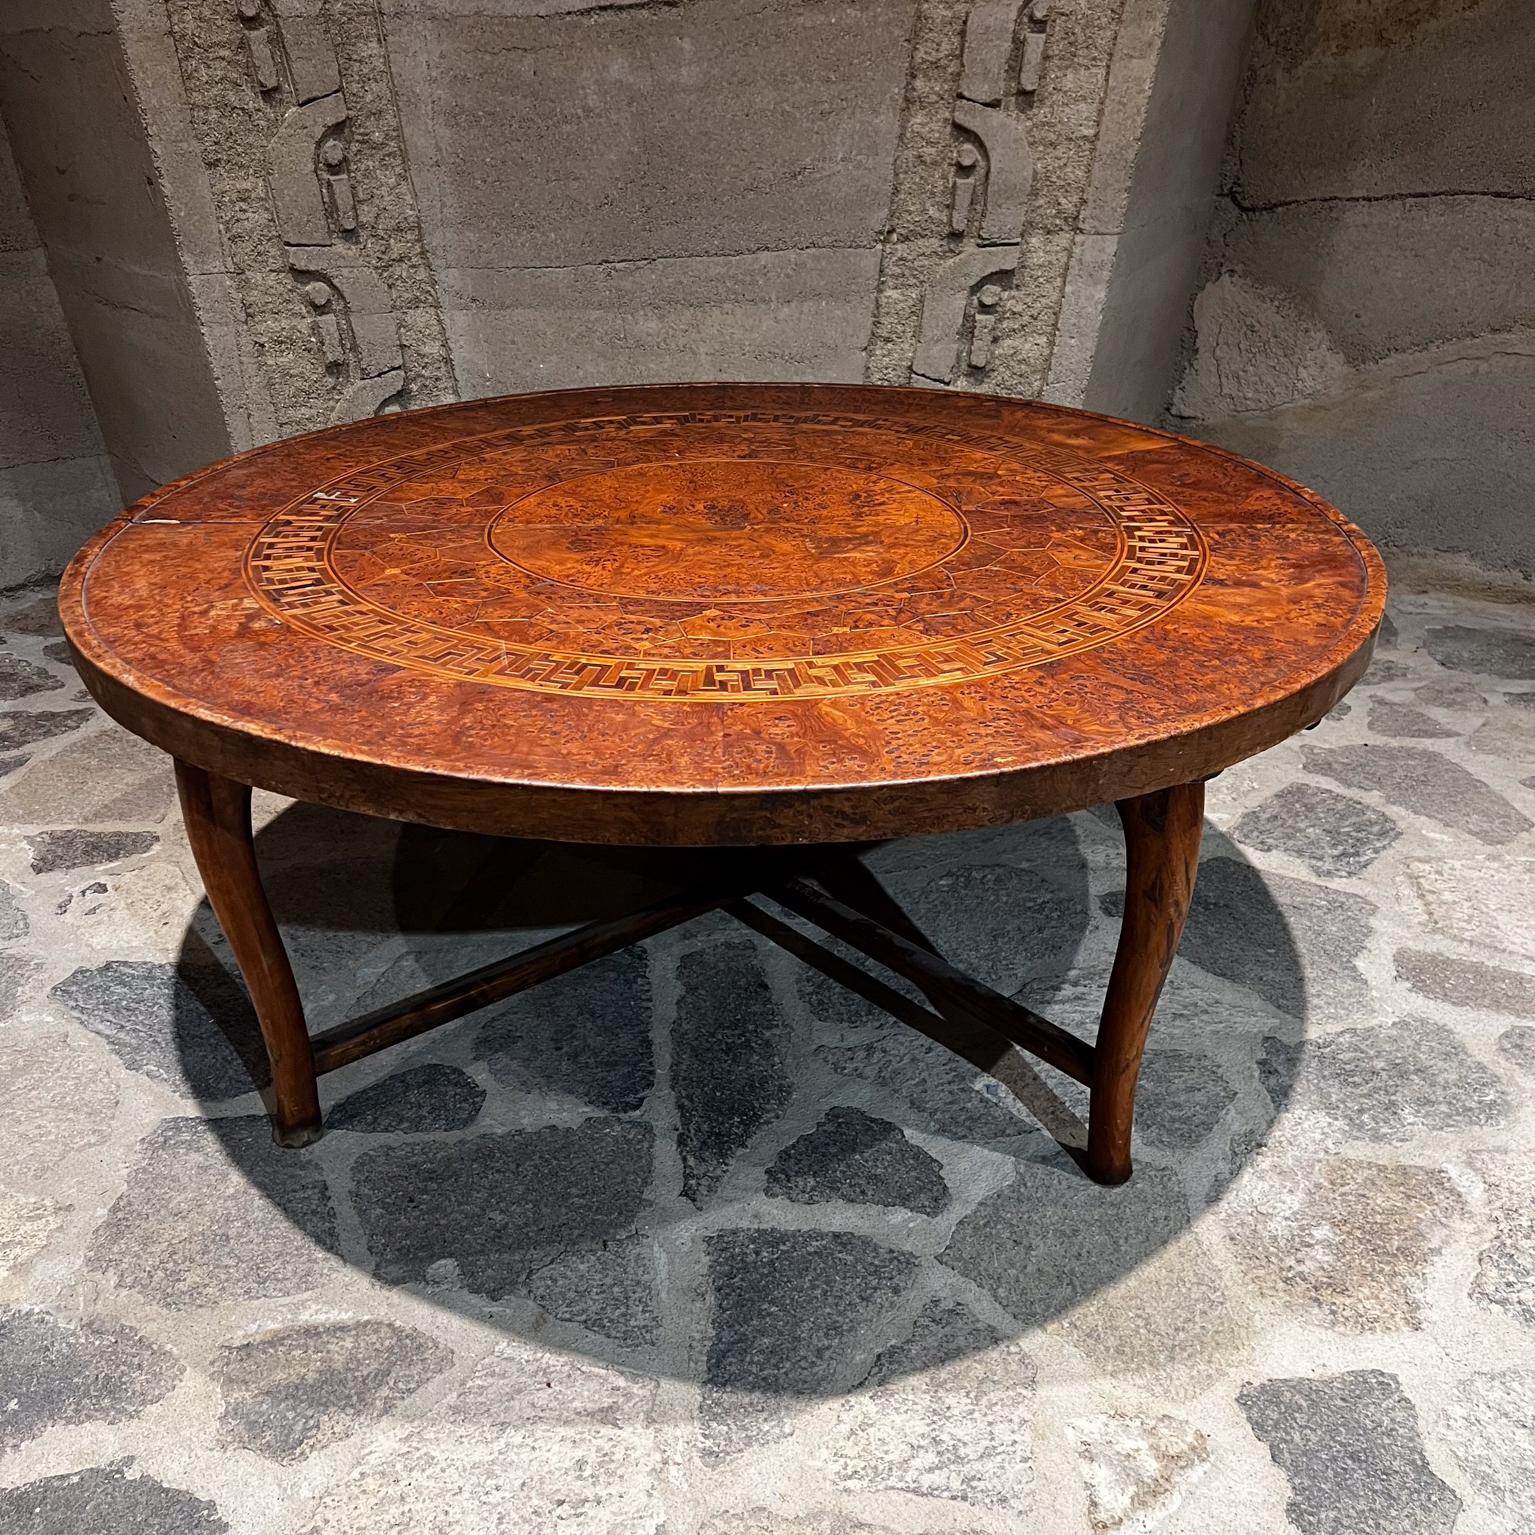 Antique Carved Wood Exotic Moroccan Coffee Table
Solid Burl Wood, Walnut and Exotic Hardwoods
Sculptural Legs and Base.
Geometric Mosaic Detail
Removable and collapsible.
20 h x 49.5 diameter
Original Unrestored Preowned Condition.
Expect vintage